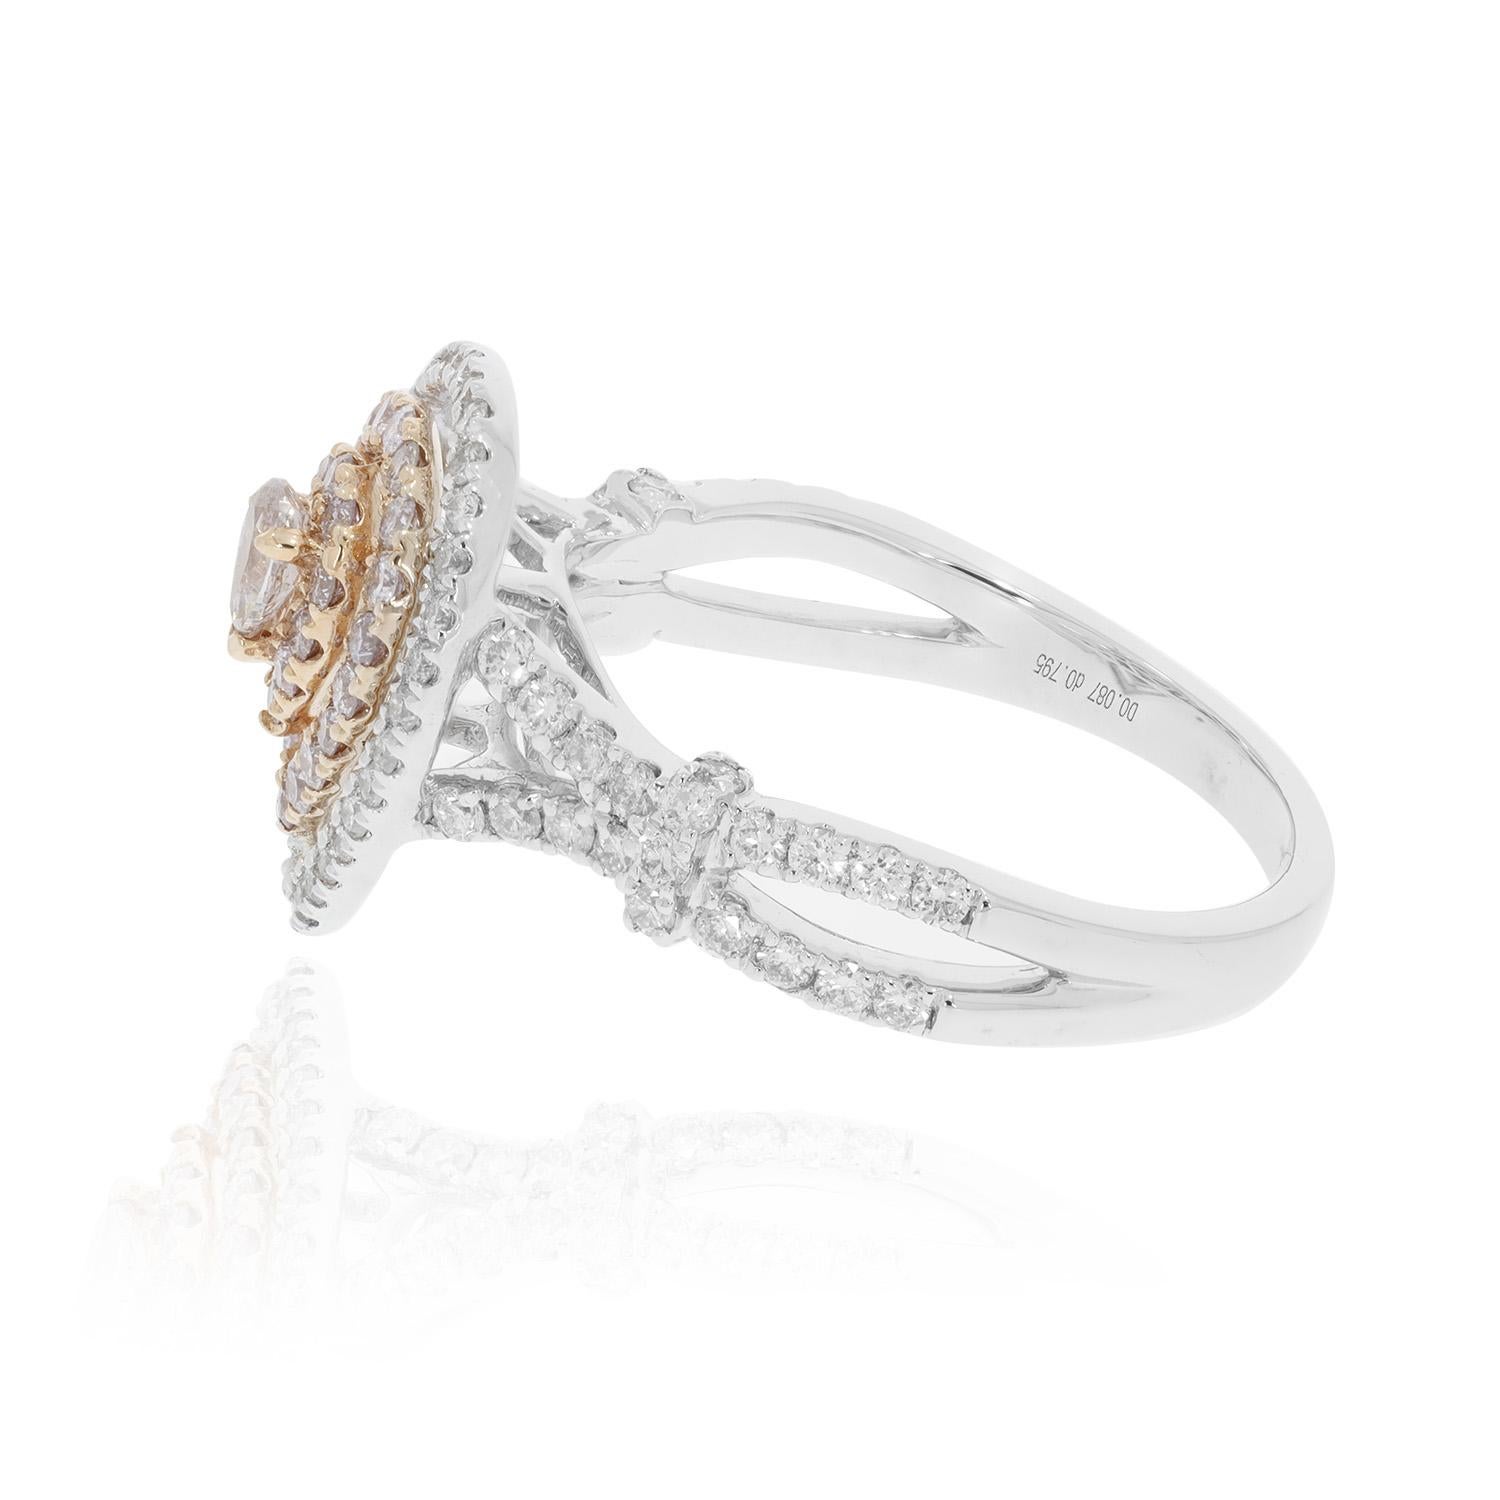 Diamonds are a girl's best friend, so what better way to profess your love than this elegant ring? Set in 18K two-tone gold, it boasts of a Pink Diamond in an exquisite pear cut design. Further enhanced with pink and white round diamonds that